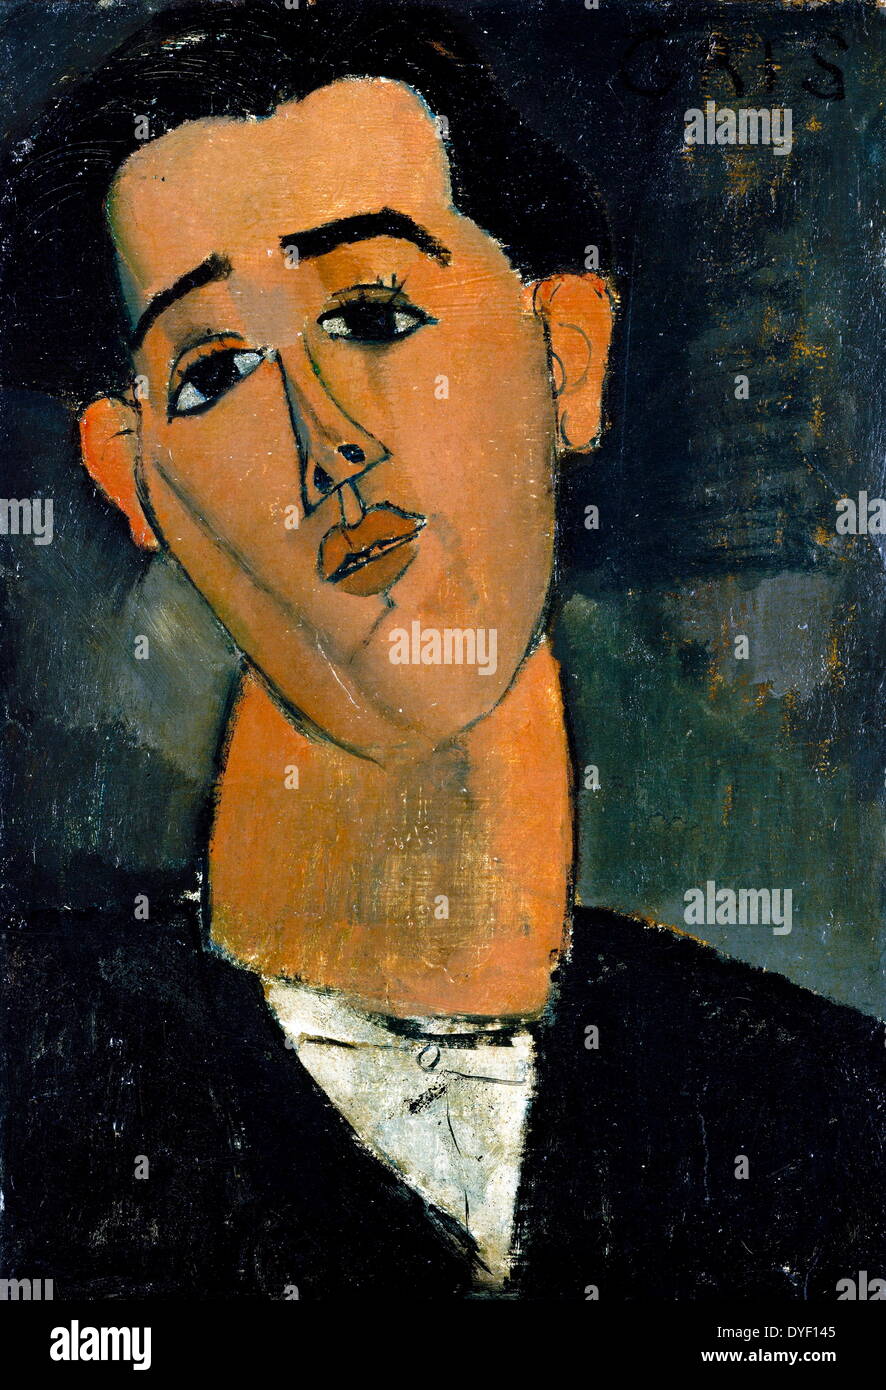 Portrait painting of José Victoriano González Pérez, (better known as Juan Gris) by Amedo Modigliani. Modigliani was alive from July 12th 1884 until Jan 24th 1920, and Juan Gris was born March 23rd, 1887 and died May 11th, 1927. Gris was a Spanish painter and sculptor who lived and worked in France most of his life. His works are closely connected to the emergence of Cubism, and are among the movement's most distinctive. Oil on Canvas, completed in 1915. Stock Photo